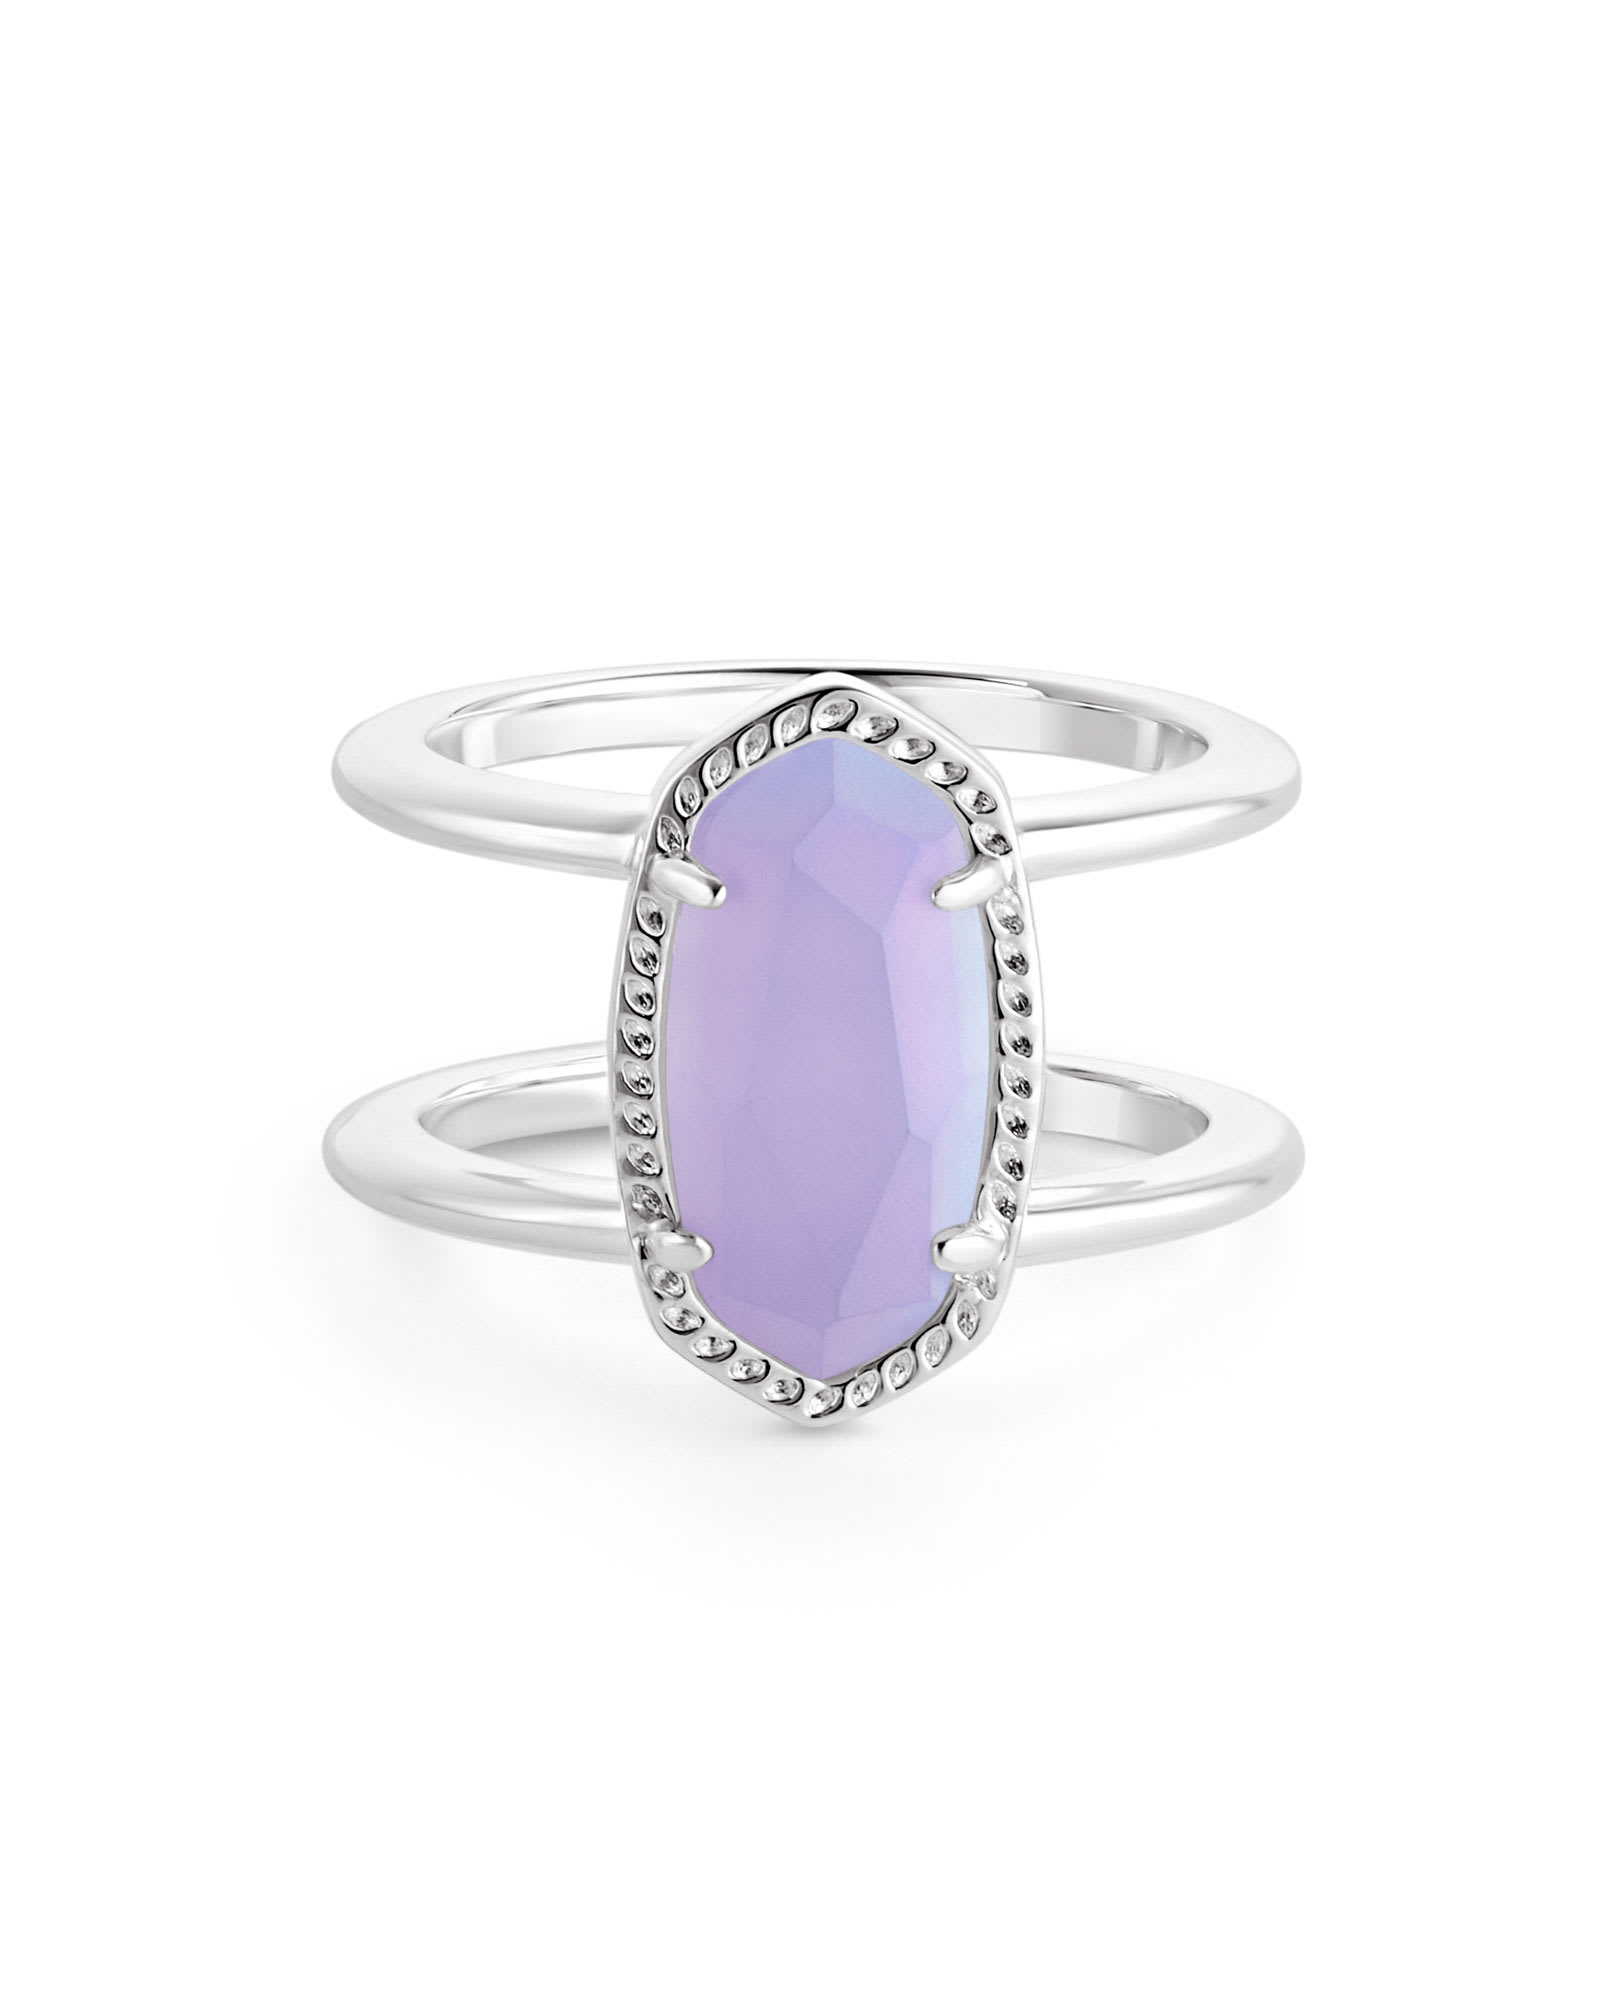 Kendra Scott Elyse Double Band Ring in Matte Iridescent Lilac | Glass